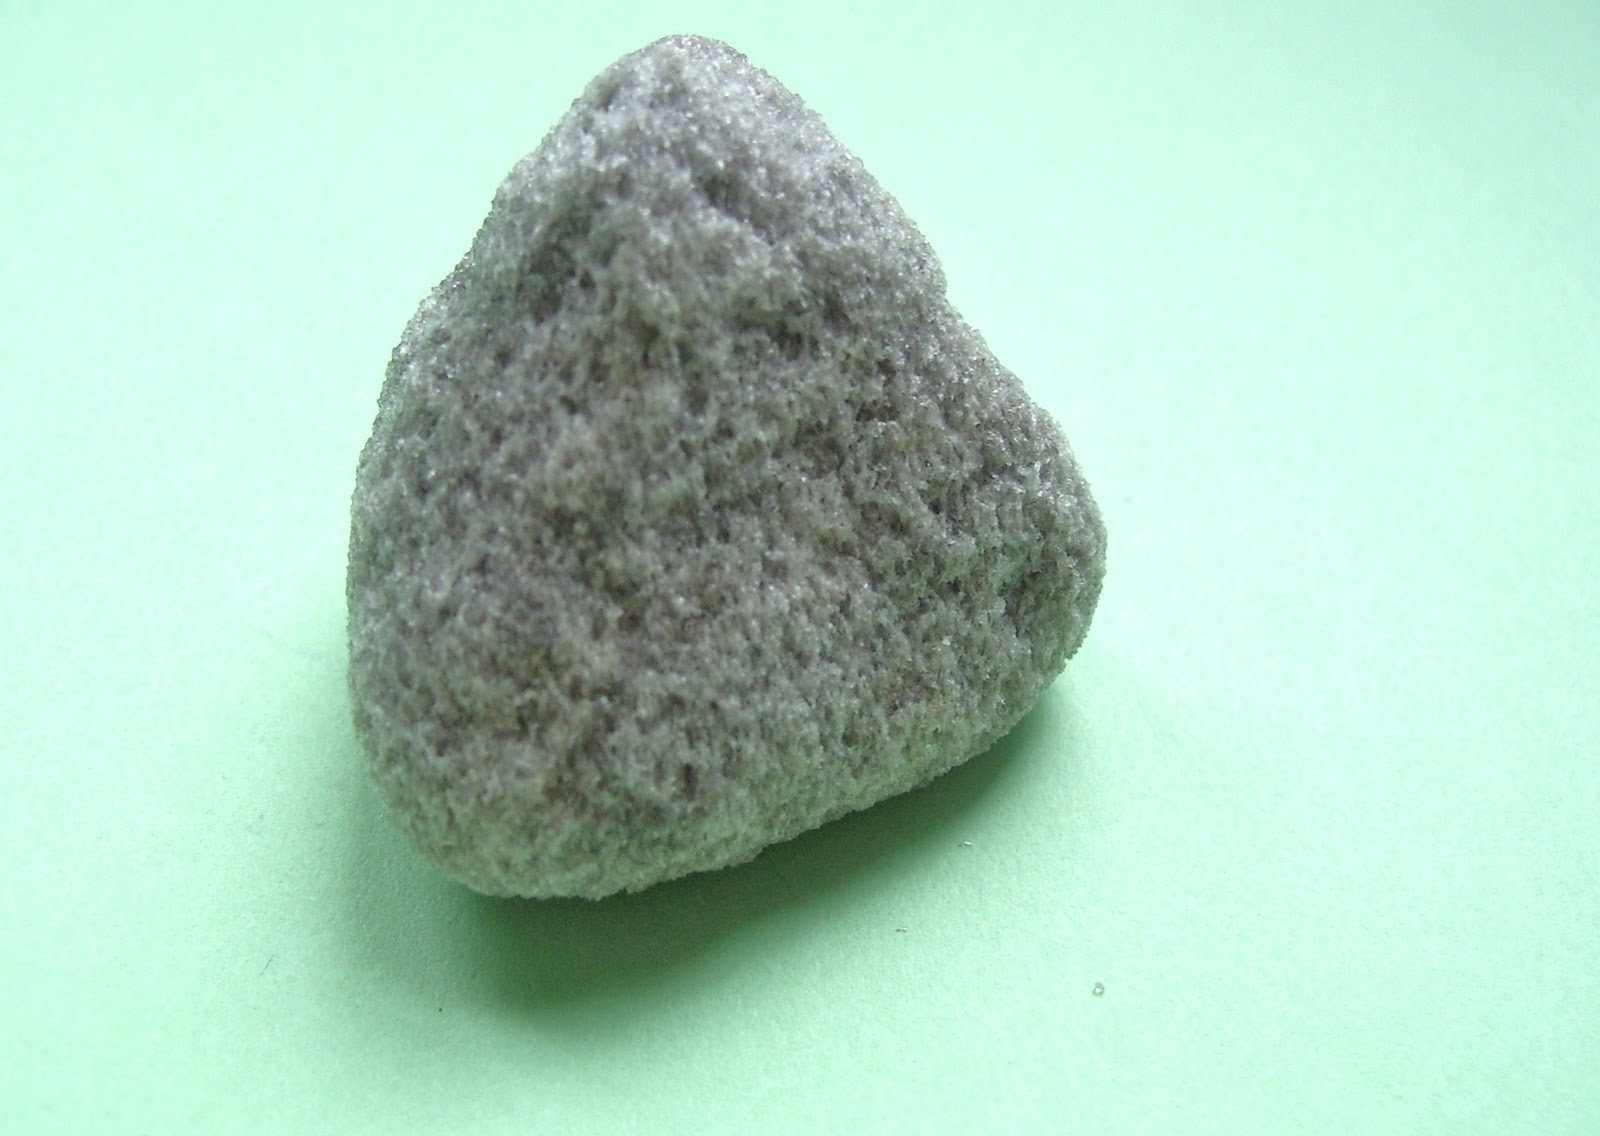 Where is pumice found in the world?